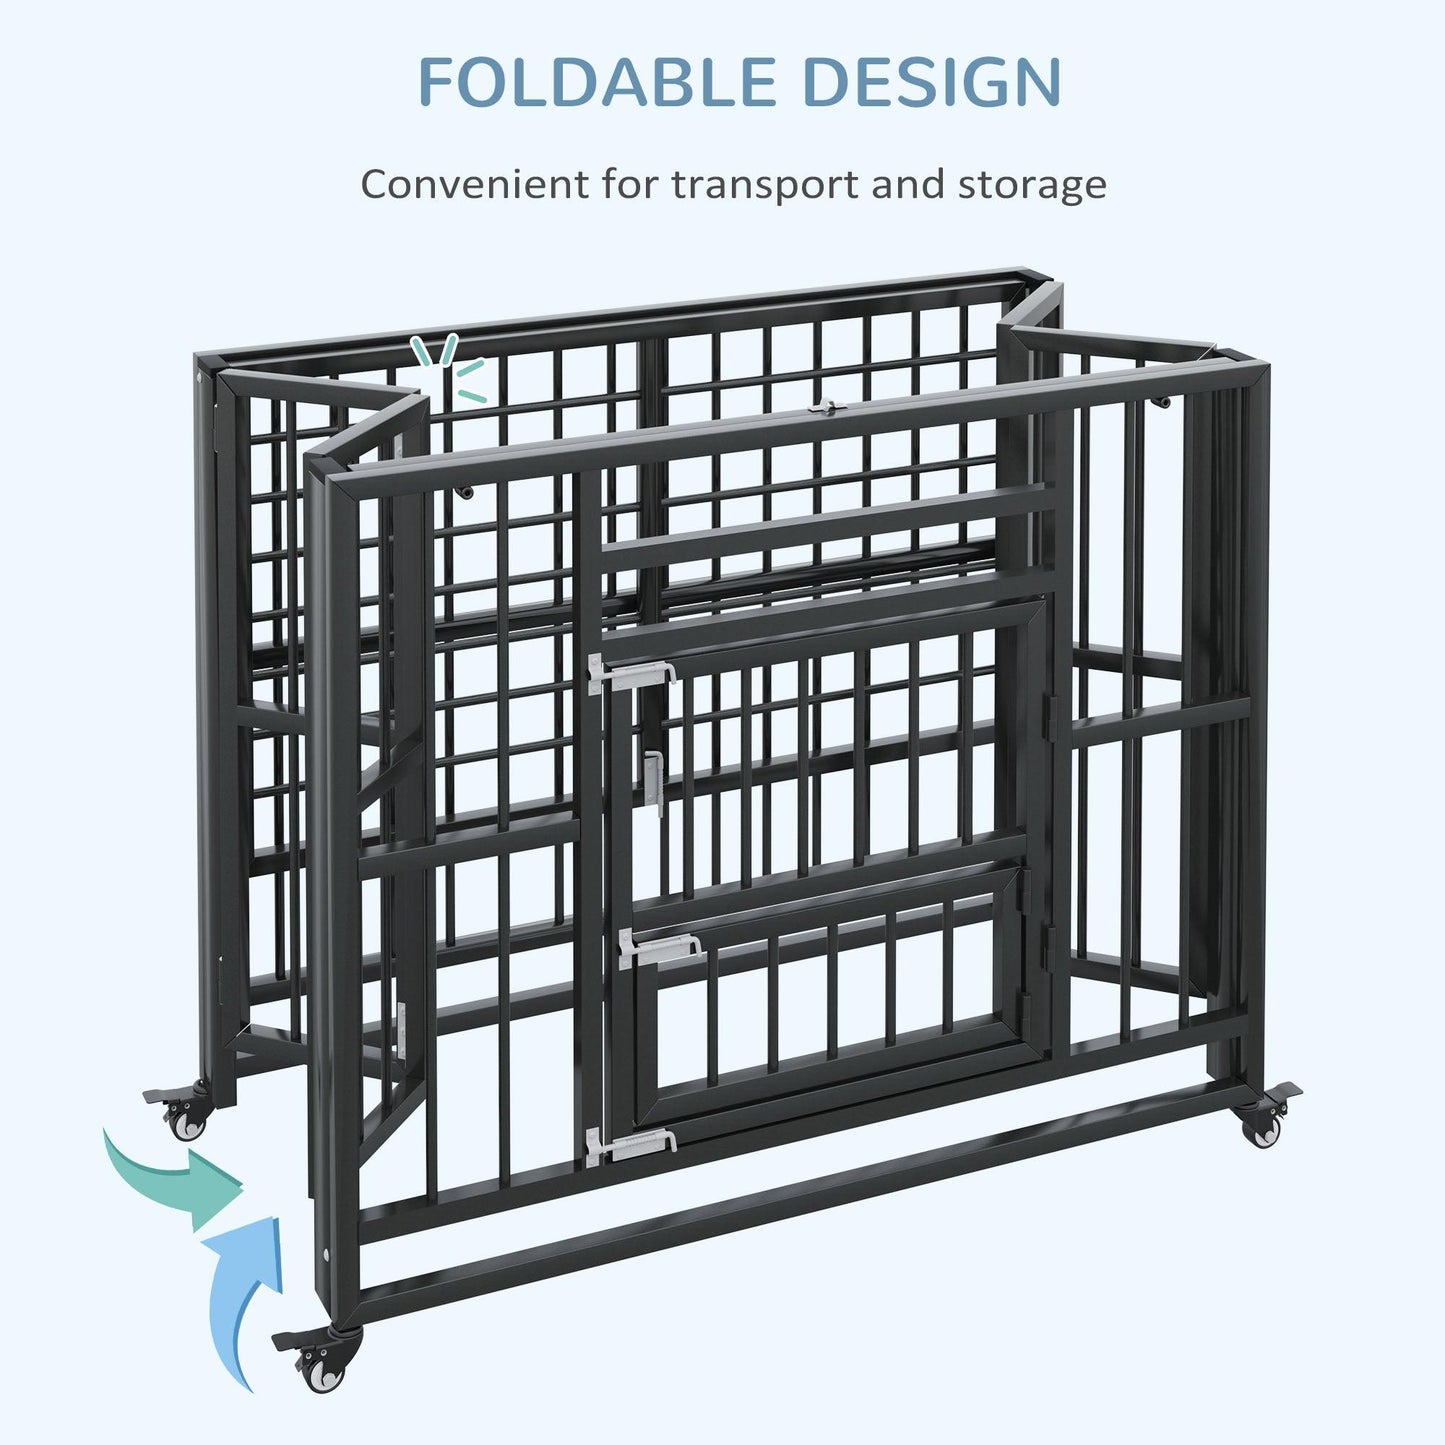 PawHut Foldable Heavy Duty Dog Crate with Openable Top, Locks, Removable Tray - Black - ALL4U RETAILER LTD